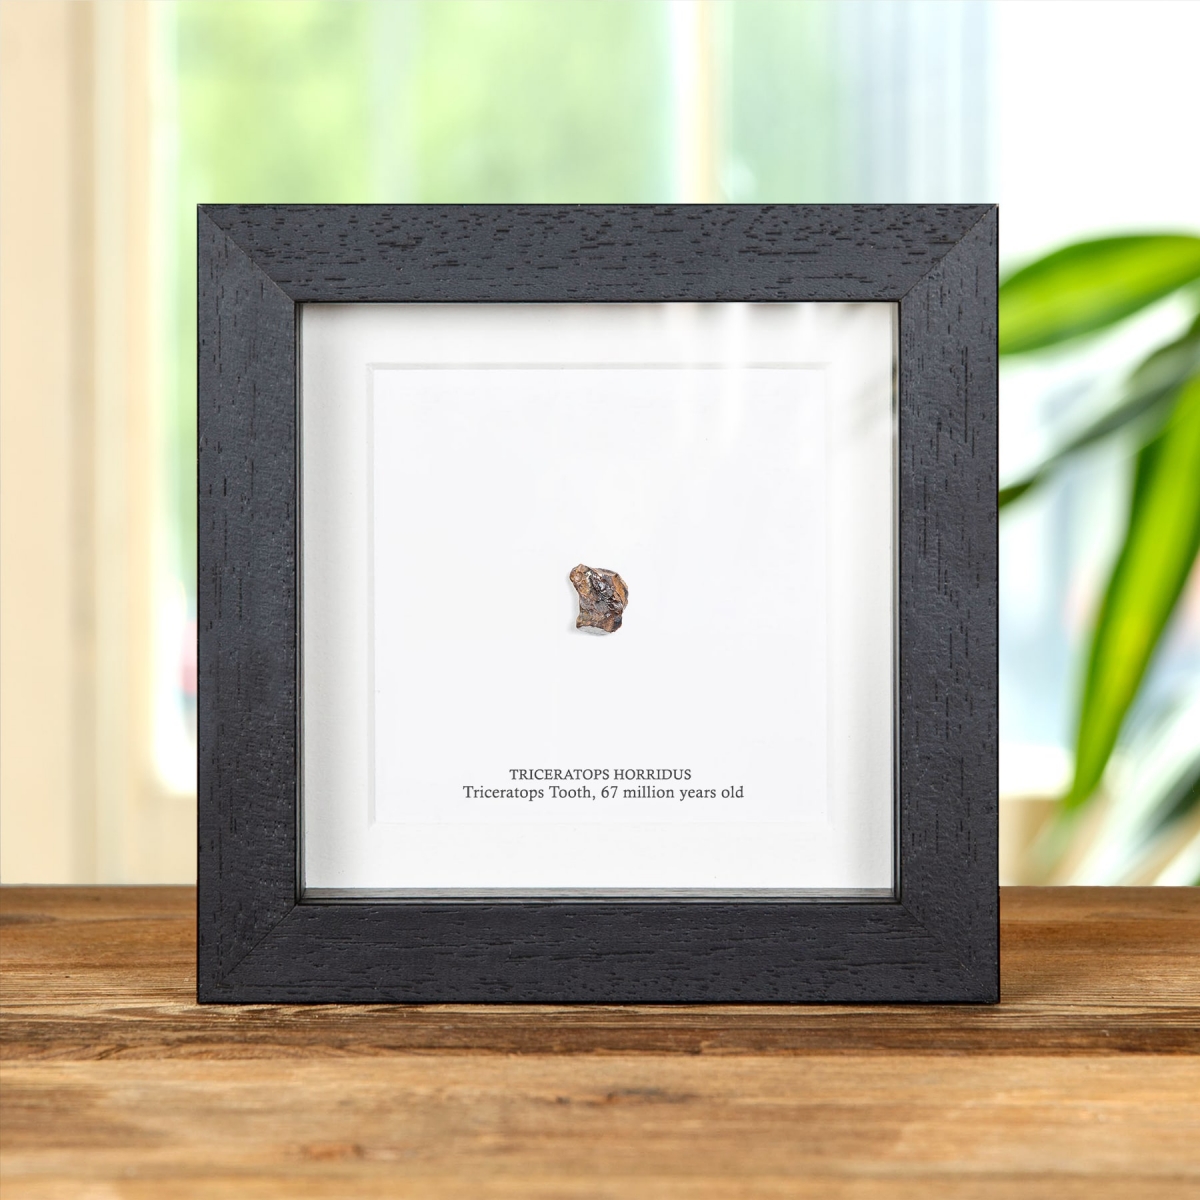 Minibeast Triceratops Tooth Fossil In Box Frame (Triceratops horridus)